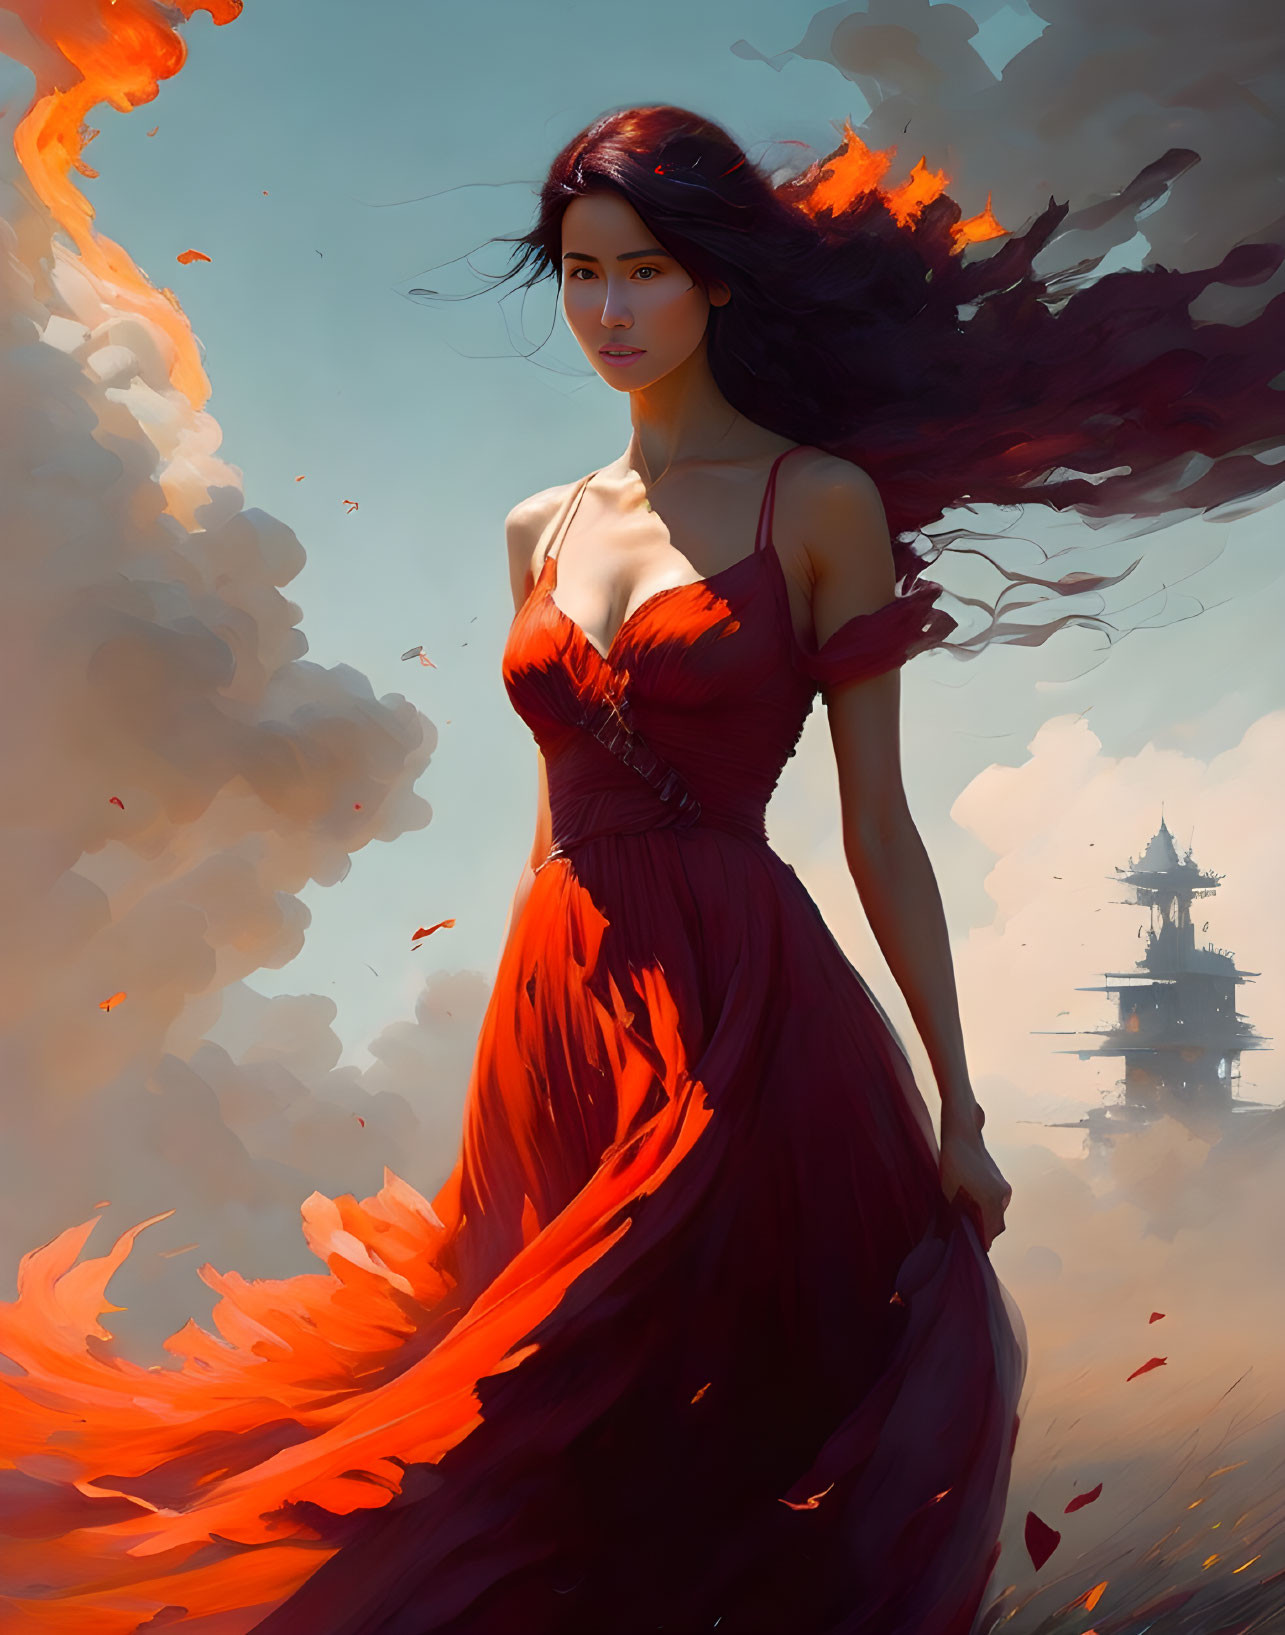 Woman in flowing red dress with billowing hair in dreamy cloud backdrop